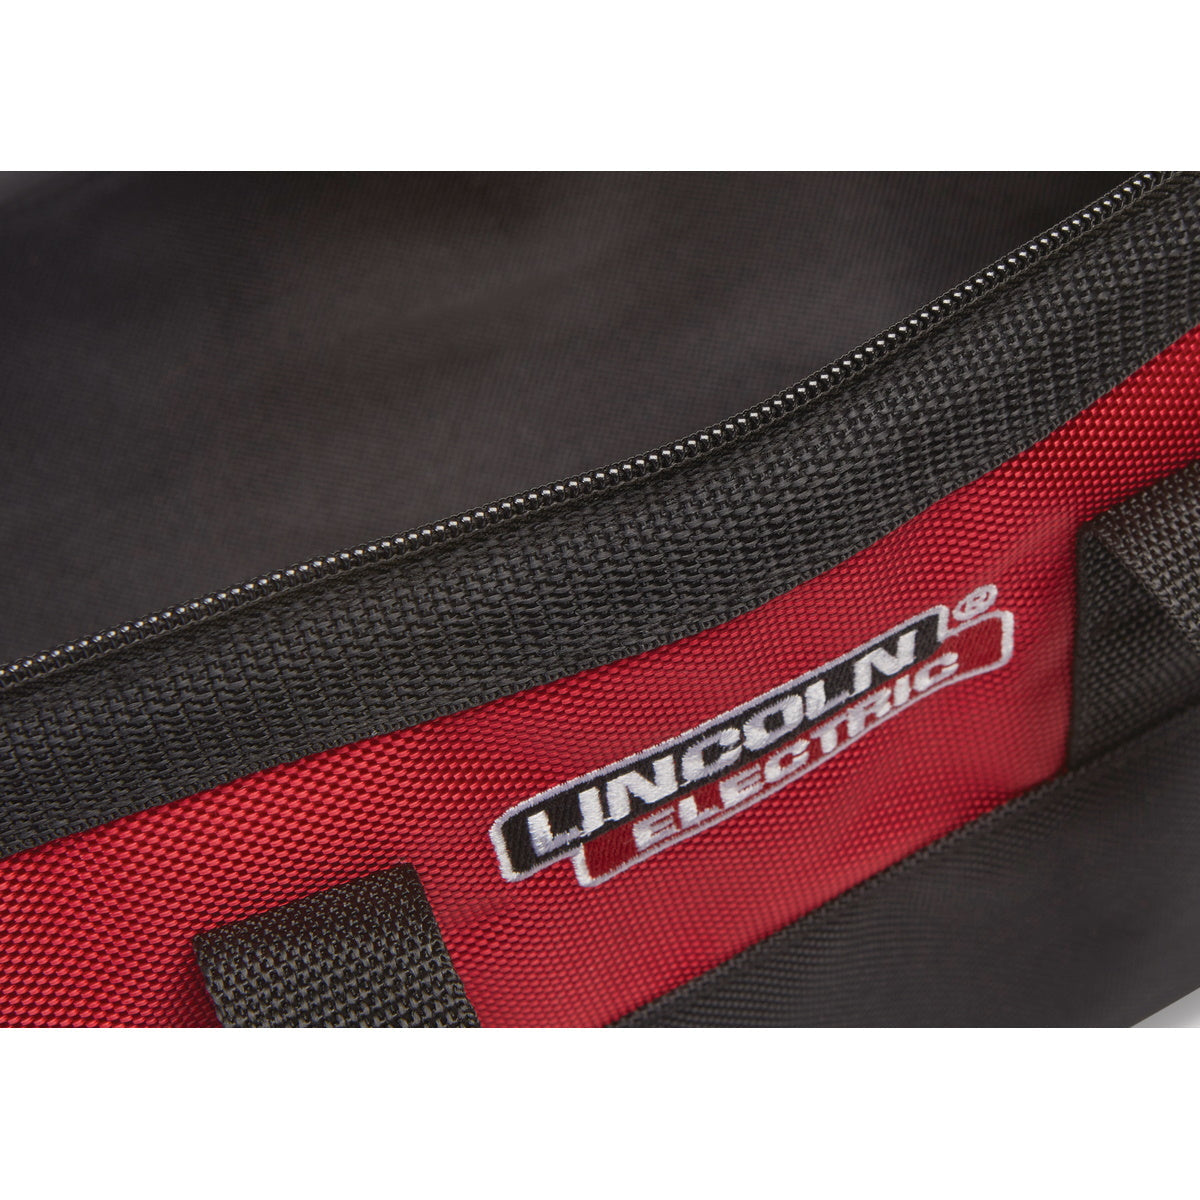 Lincoln Compact Industrial Tool Bag (K4774-1)